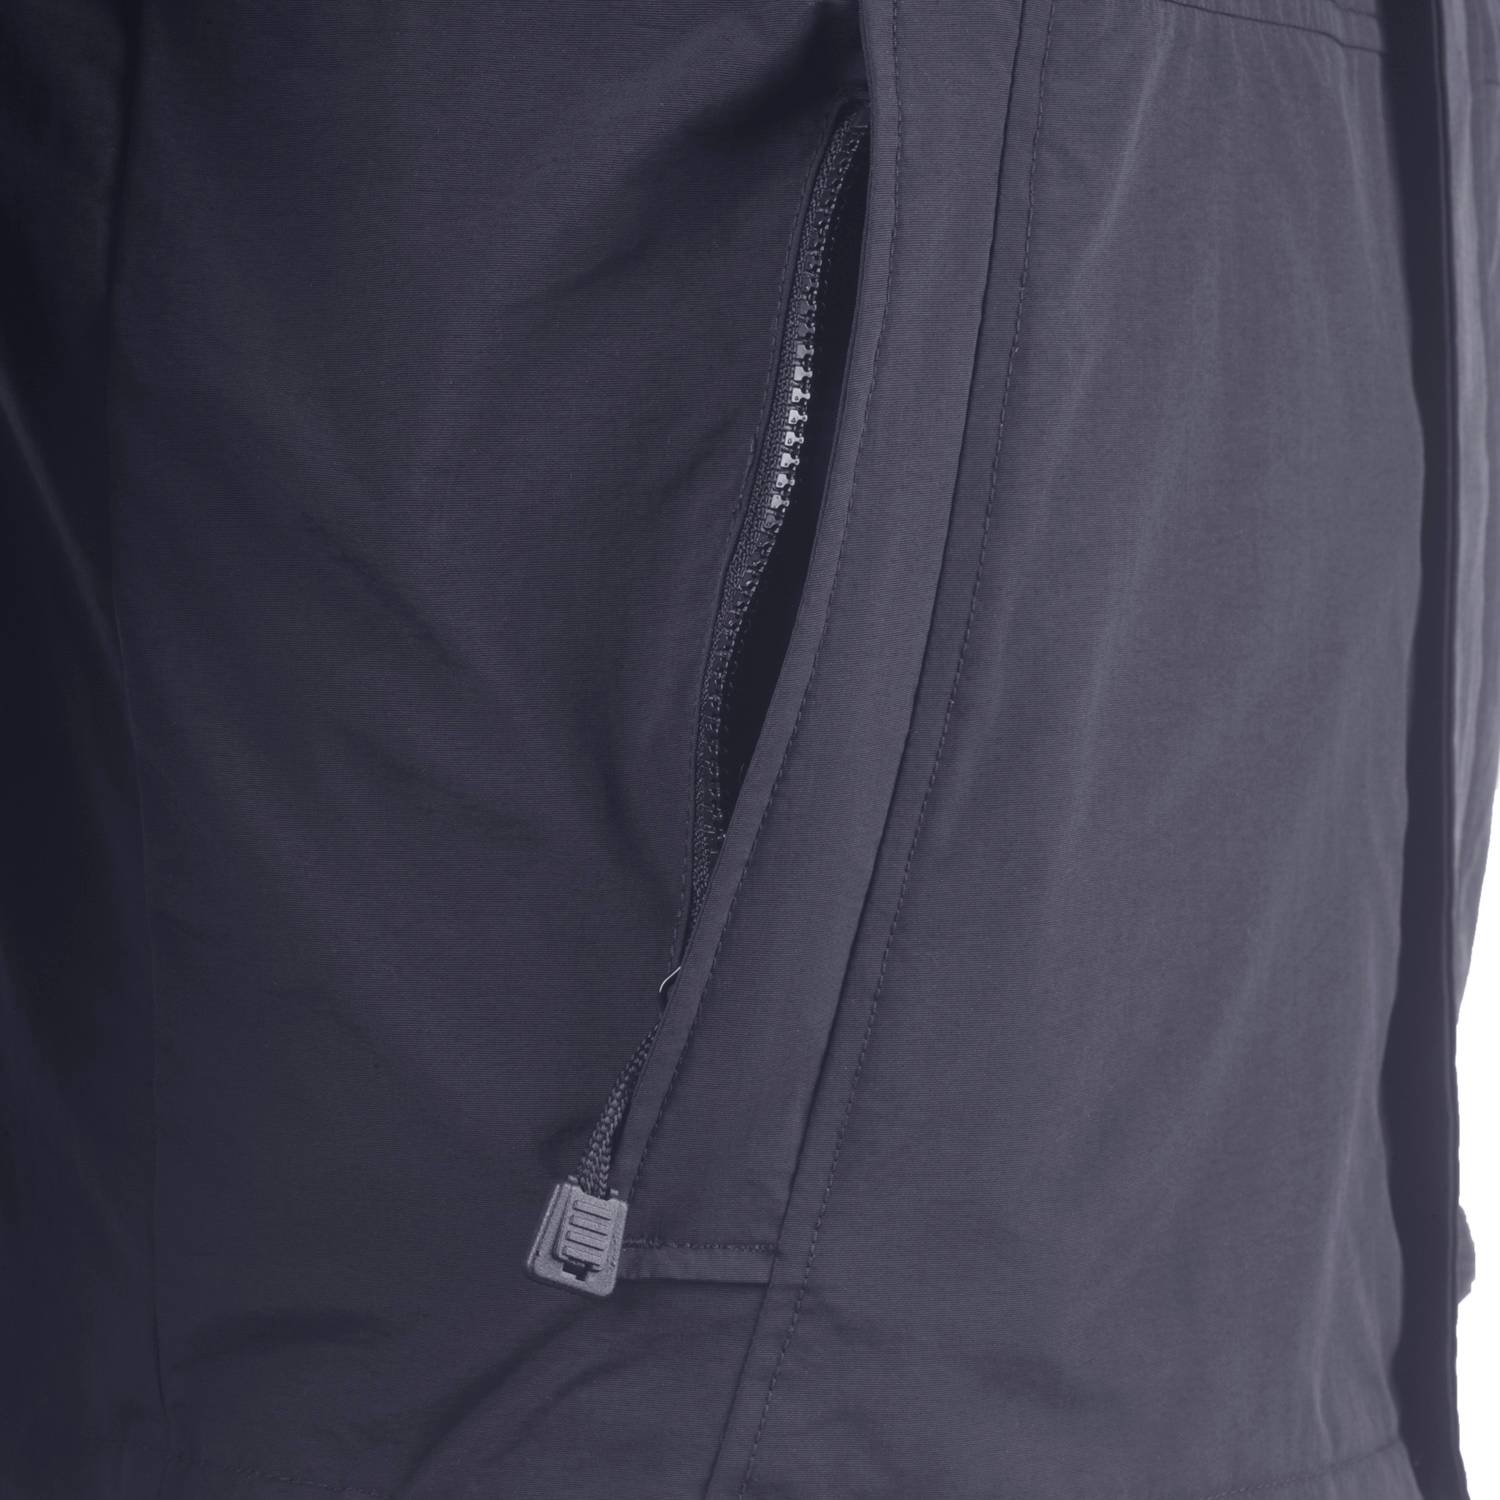 Galls Heavyweight System | Galls Insulated Jackets